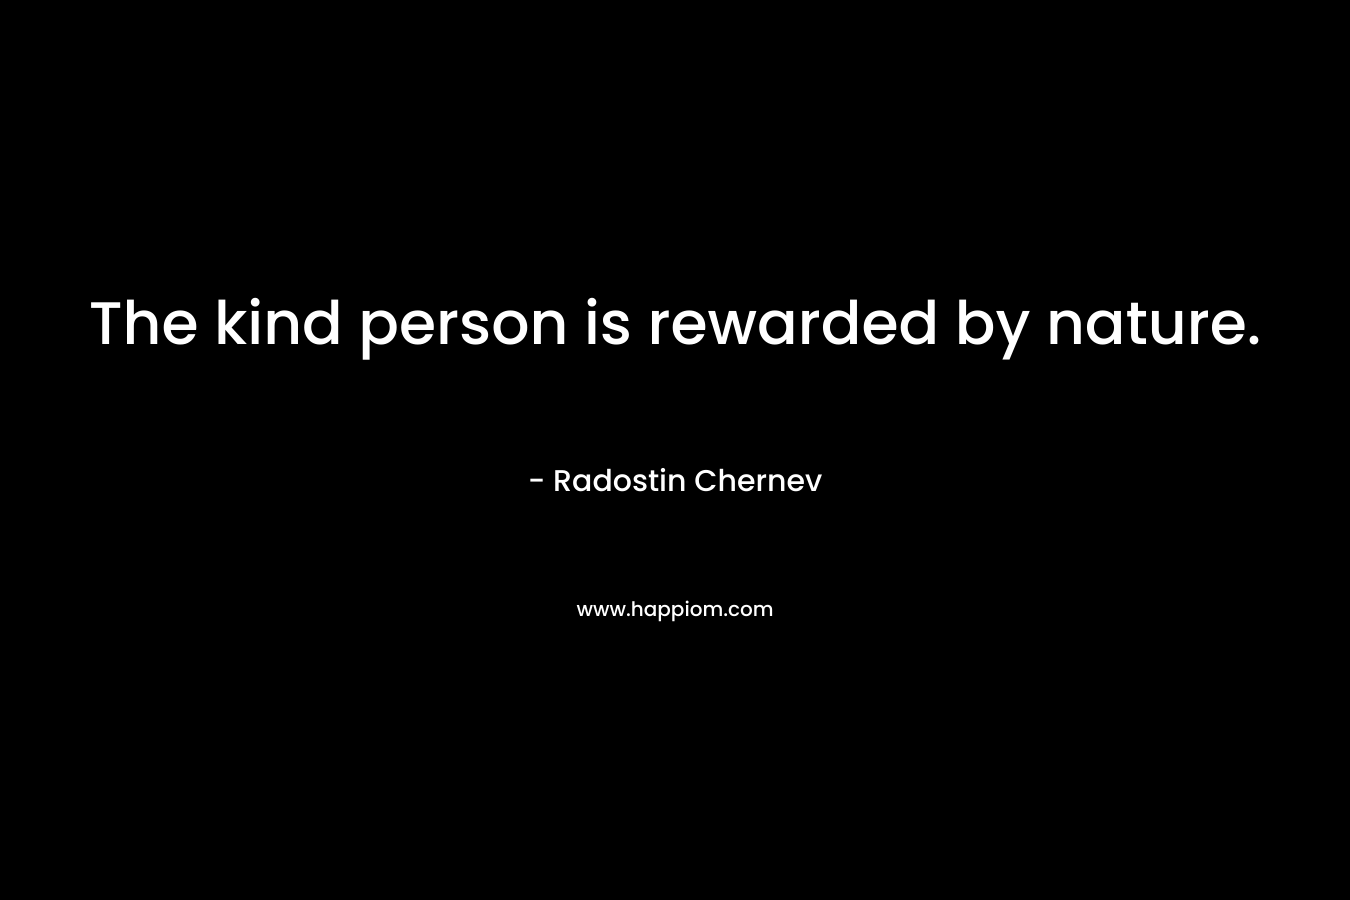 The kind person is rewarded by nature. – Radostin Chernev